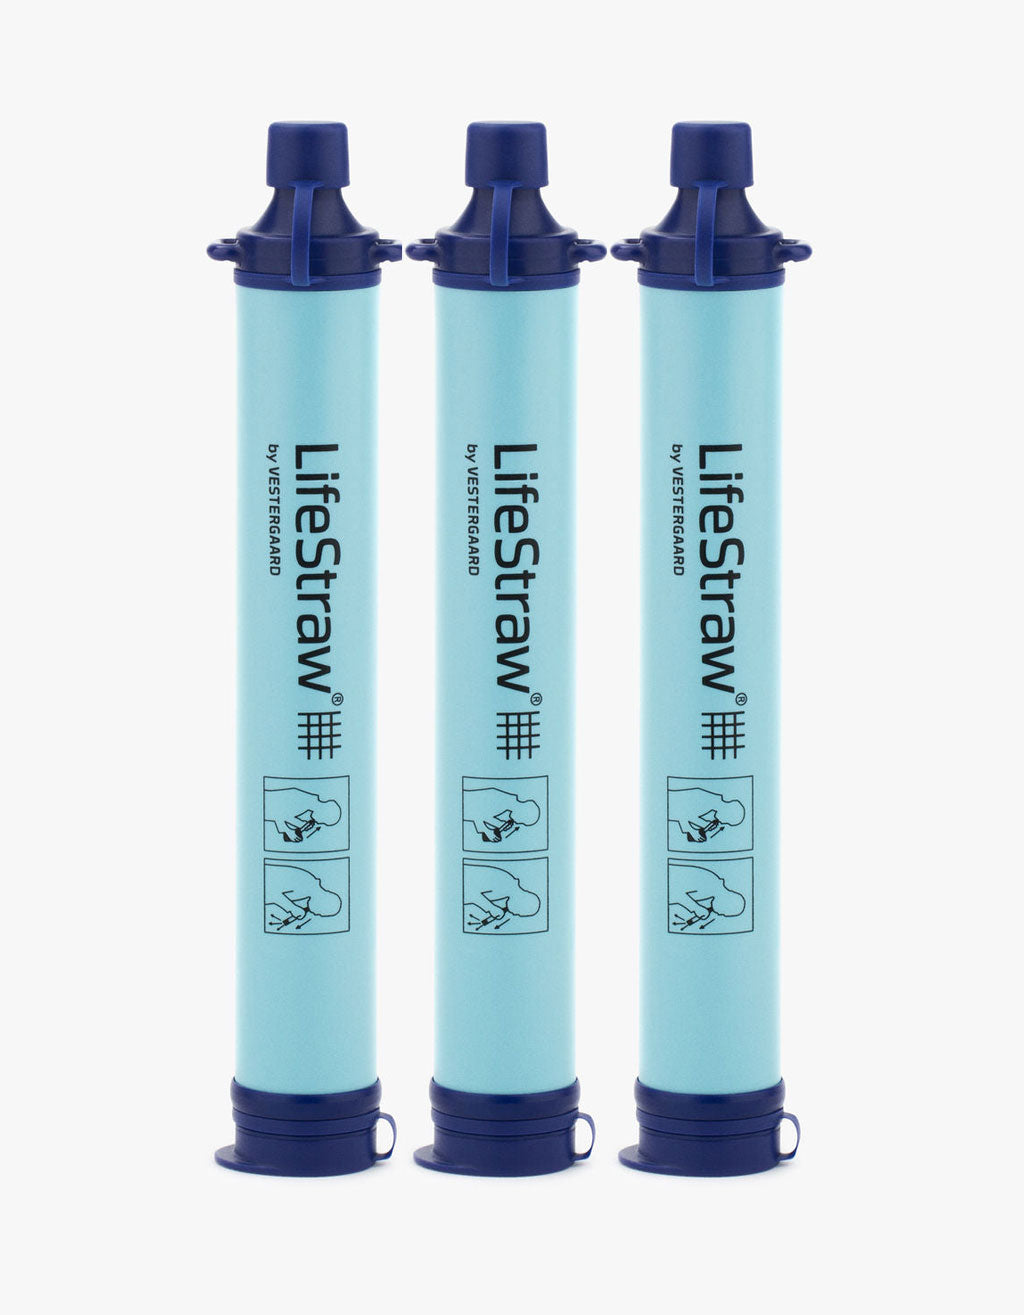 Do Lifestraws Expire? And How Long Does a Lifestraw Last? – MSPure